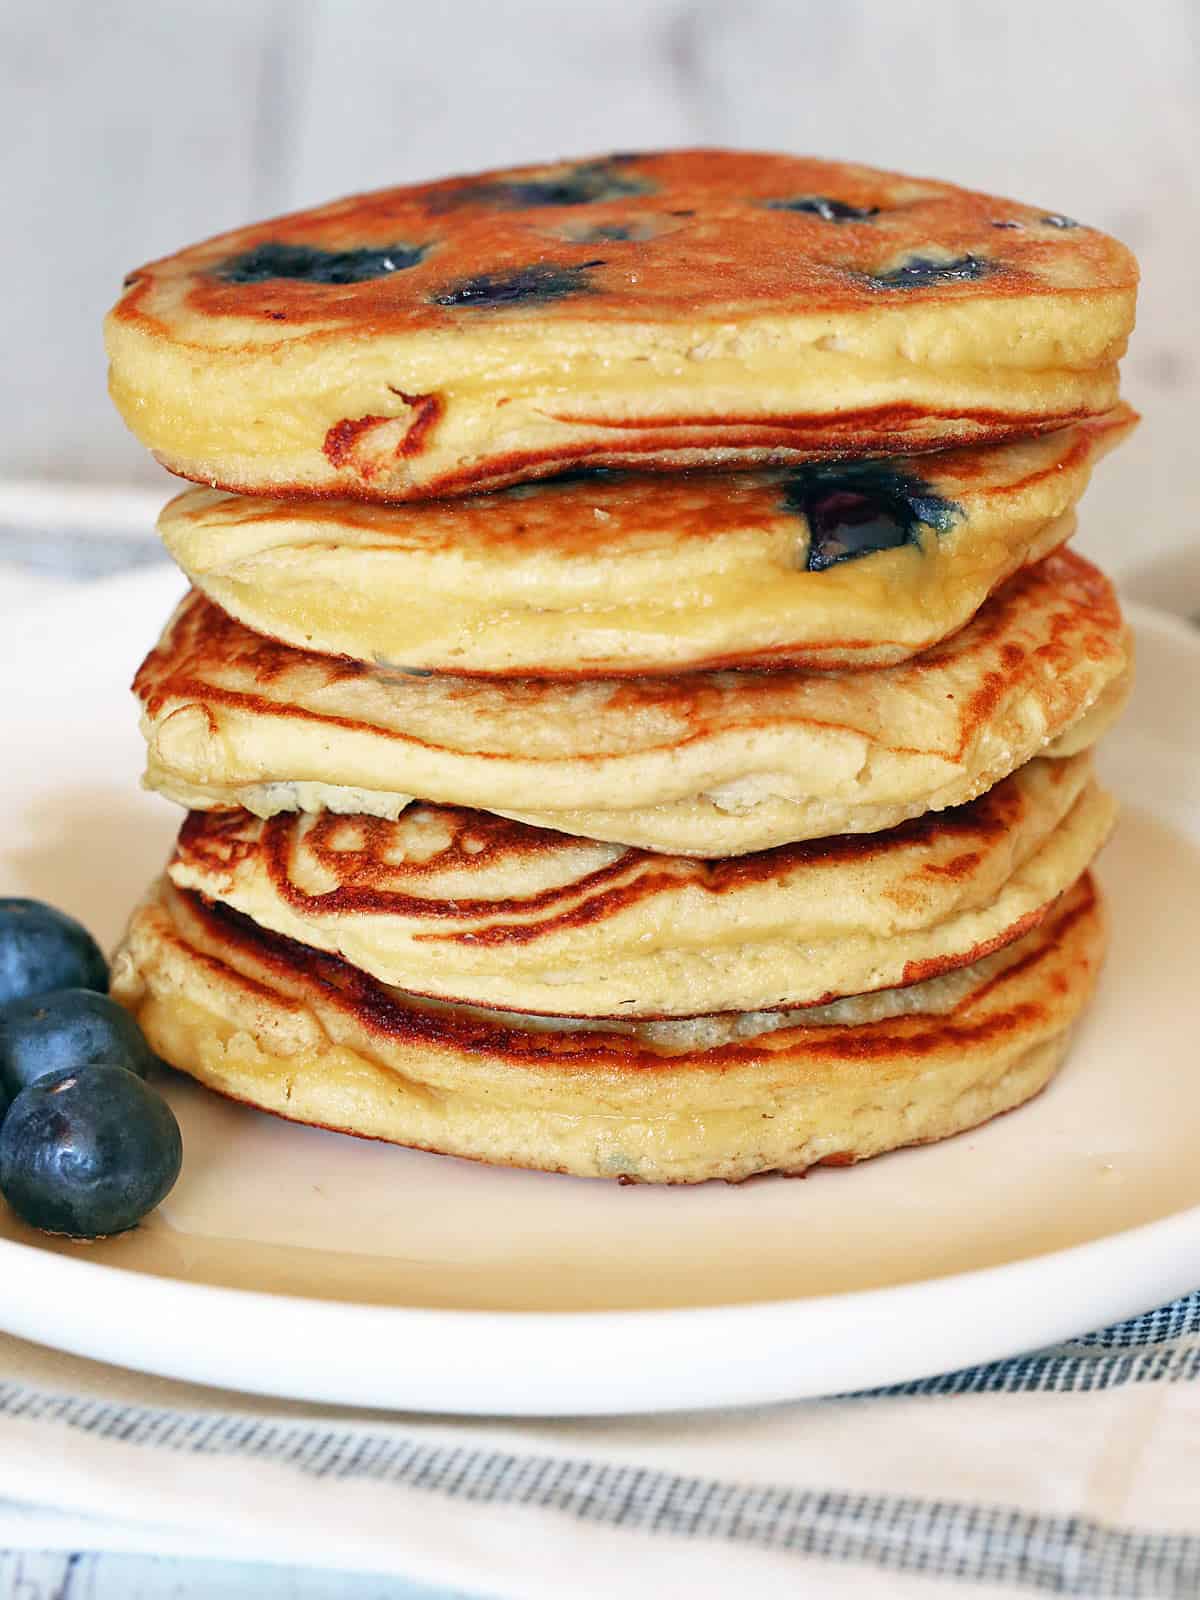 Coconut flour pancakes are served on a white plate.